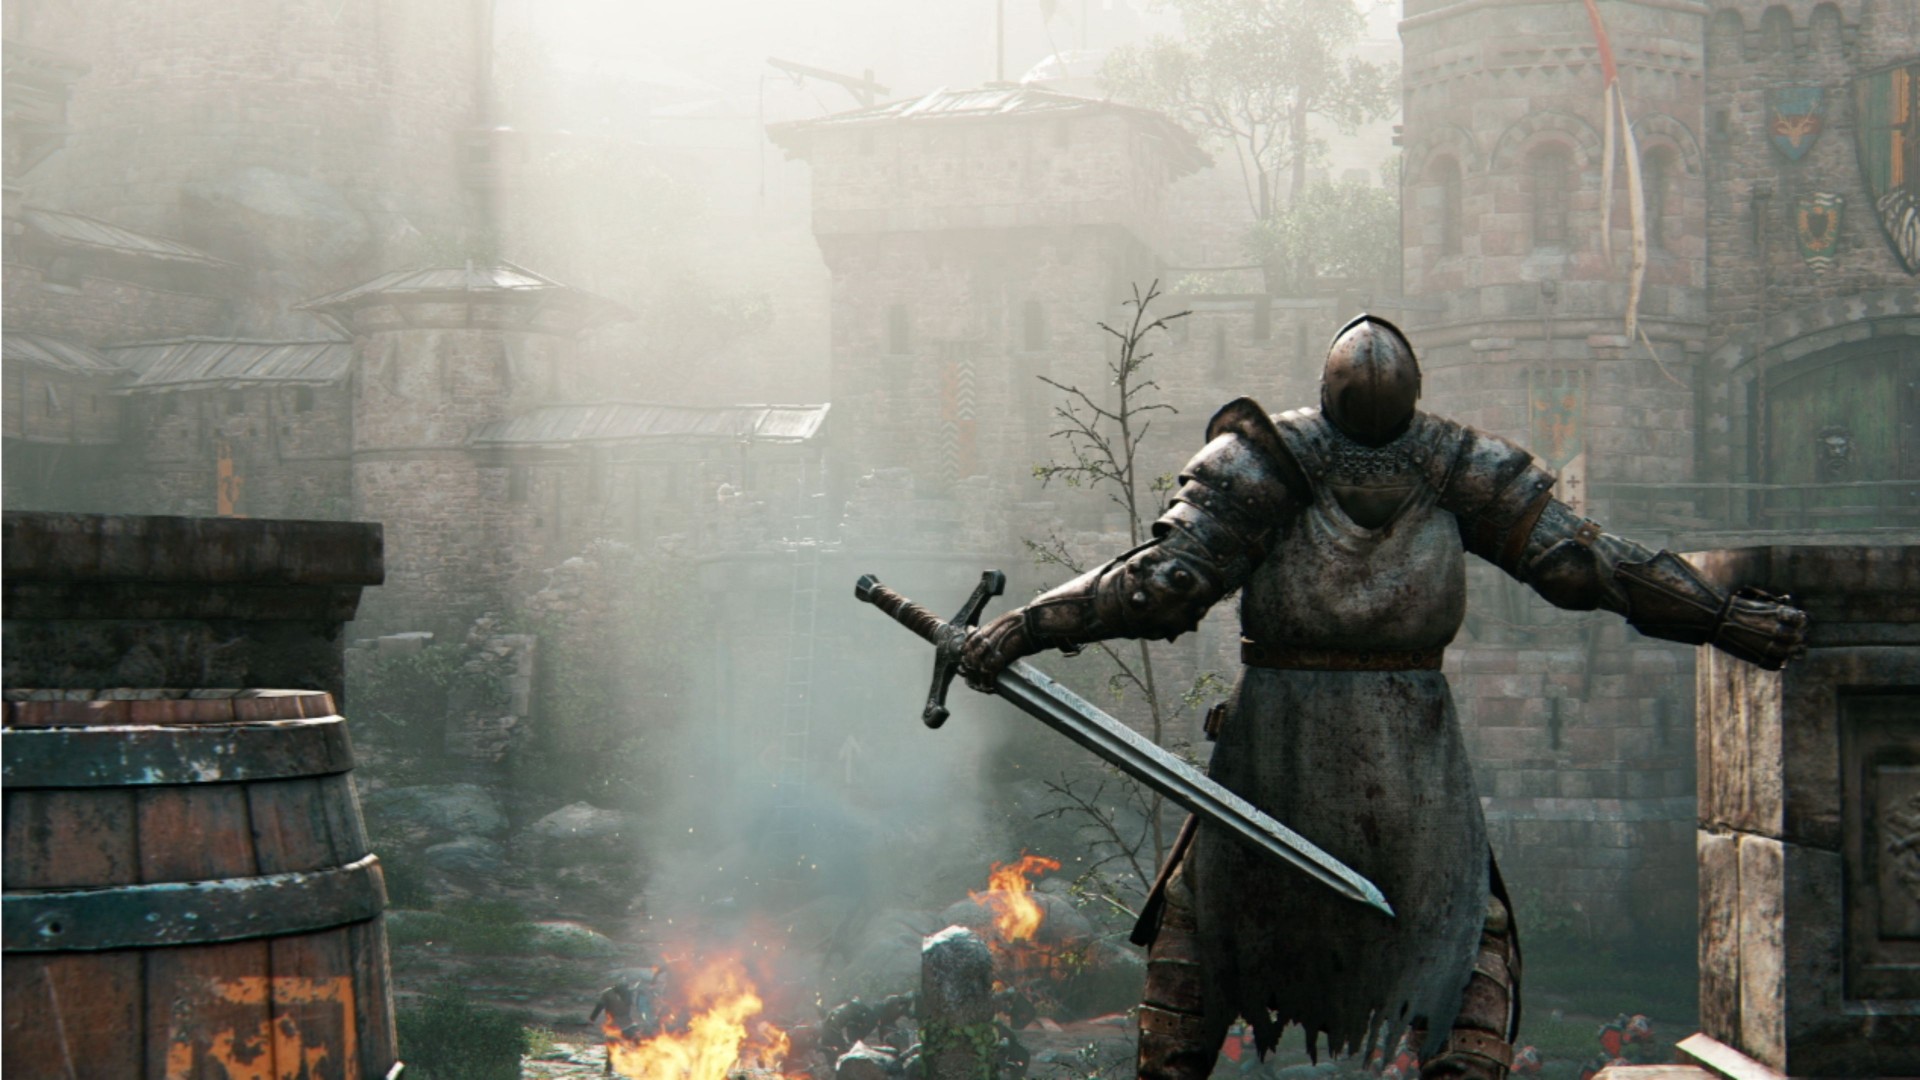 1080p for honor images